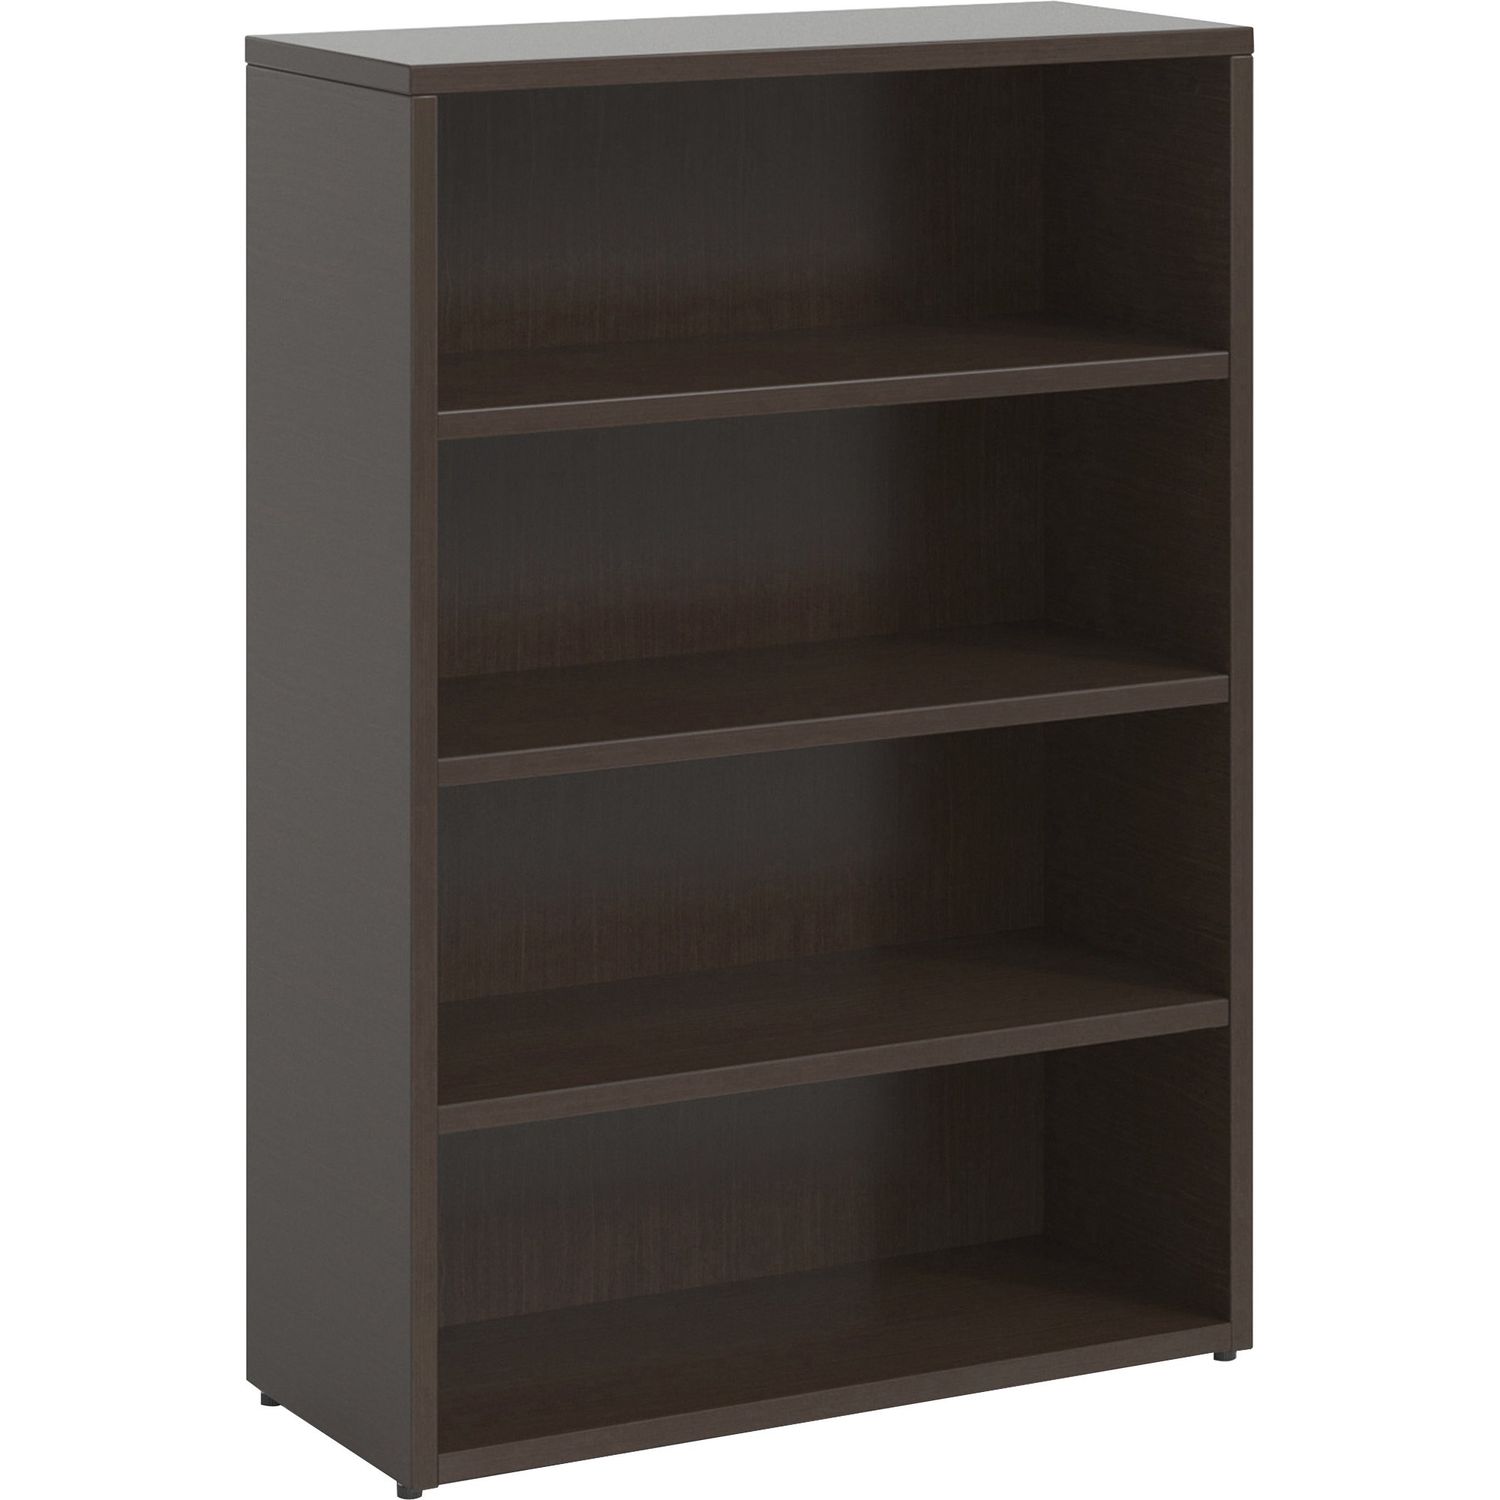 Prominence Espresso Laminate Bookcase 34" x 12" x 48" , 1" Top, 3 Shelve(s), Band Edge, Material: Particleboard, Finish: Espresso Laminate Surface, Thermofused Melamine (TFM)